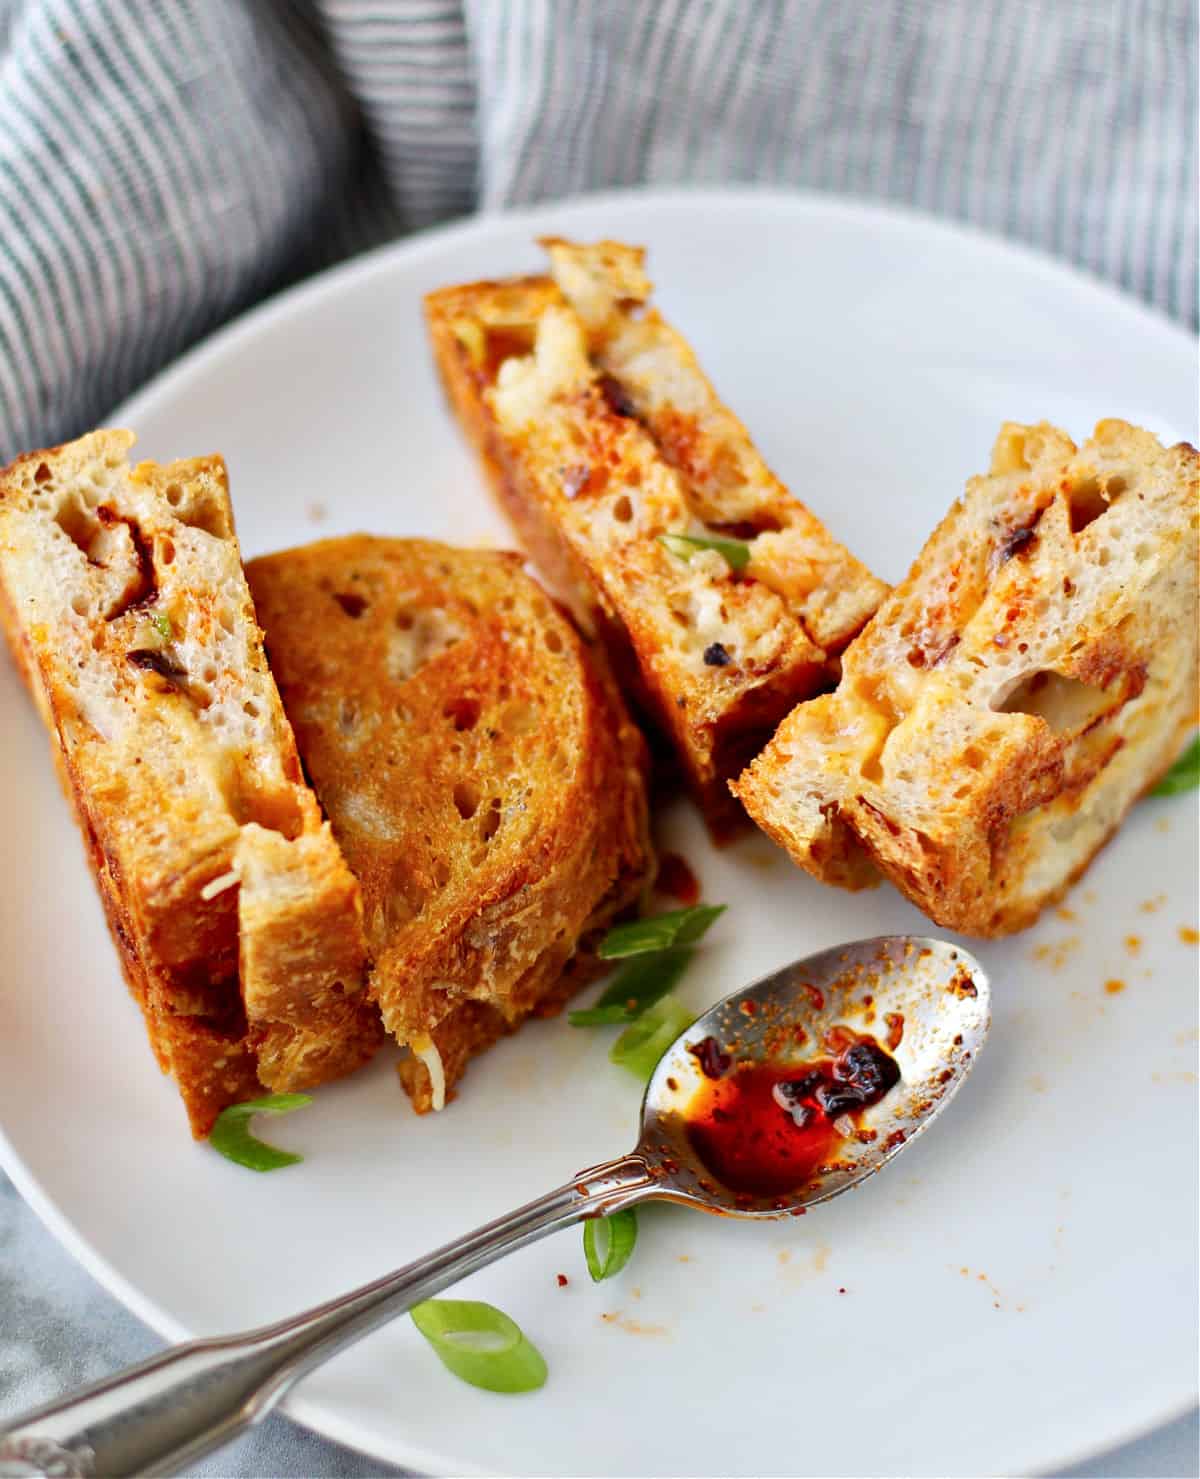 Chili crisp grilled cheese slices on a plate.